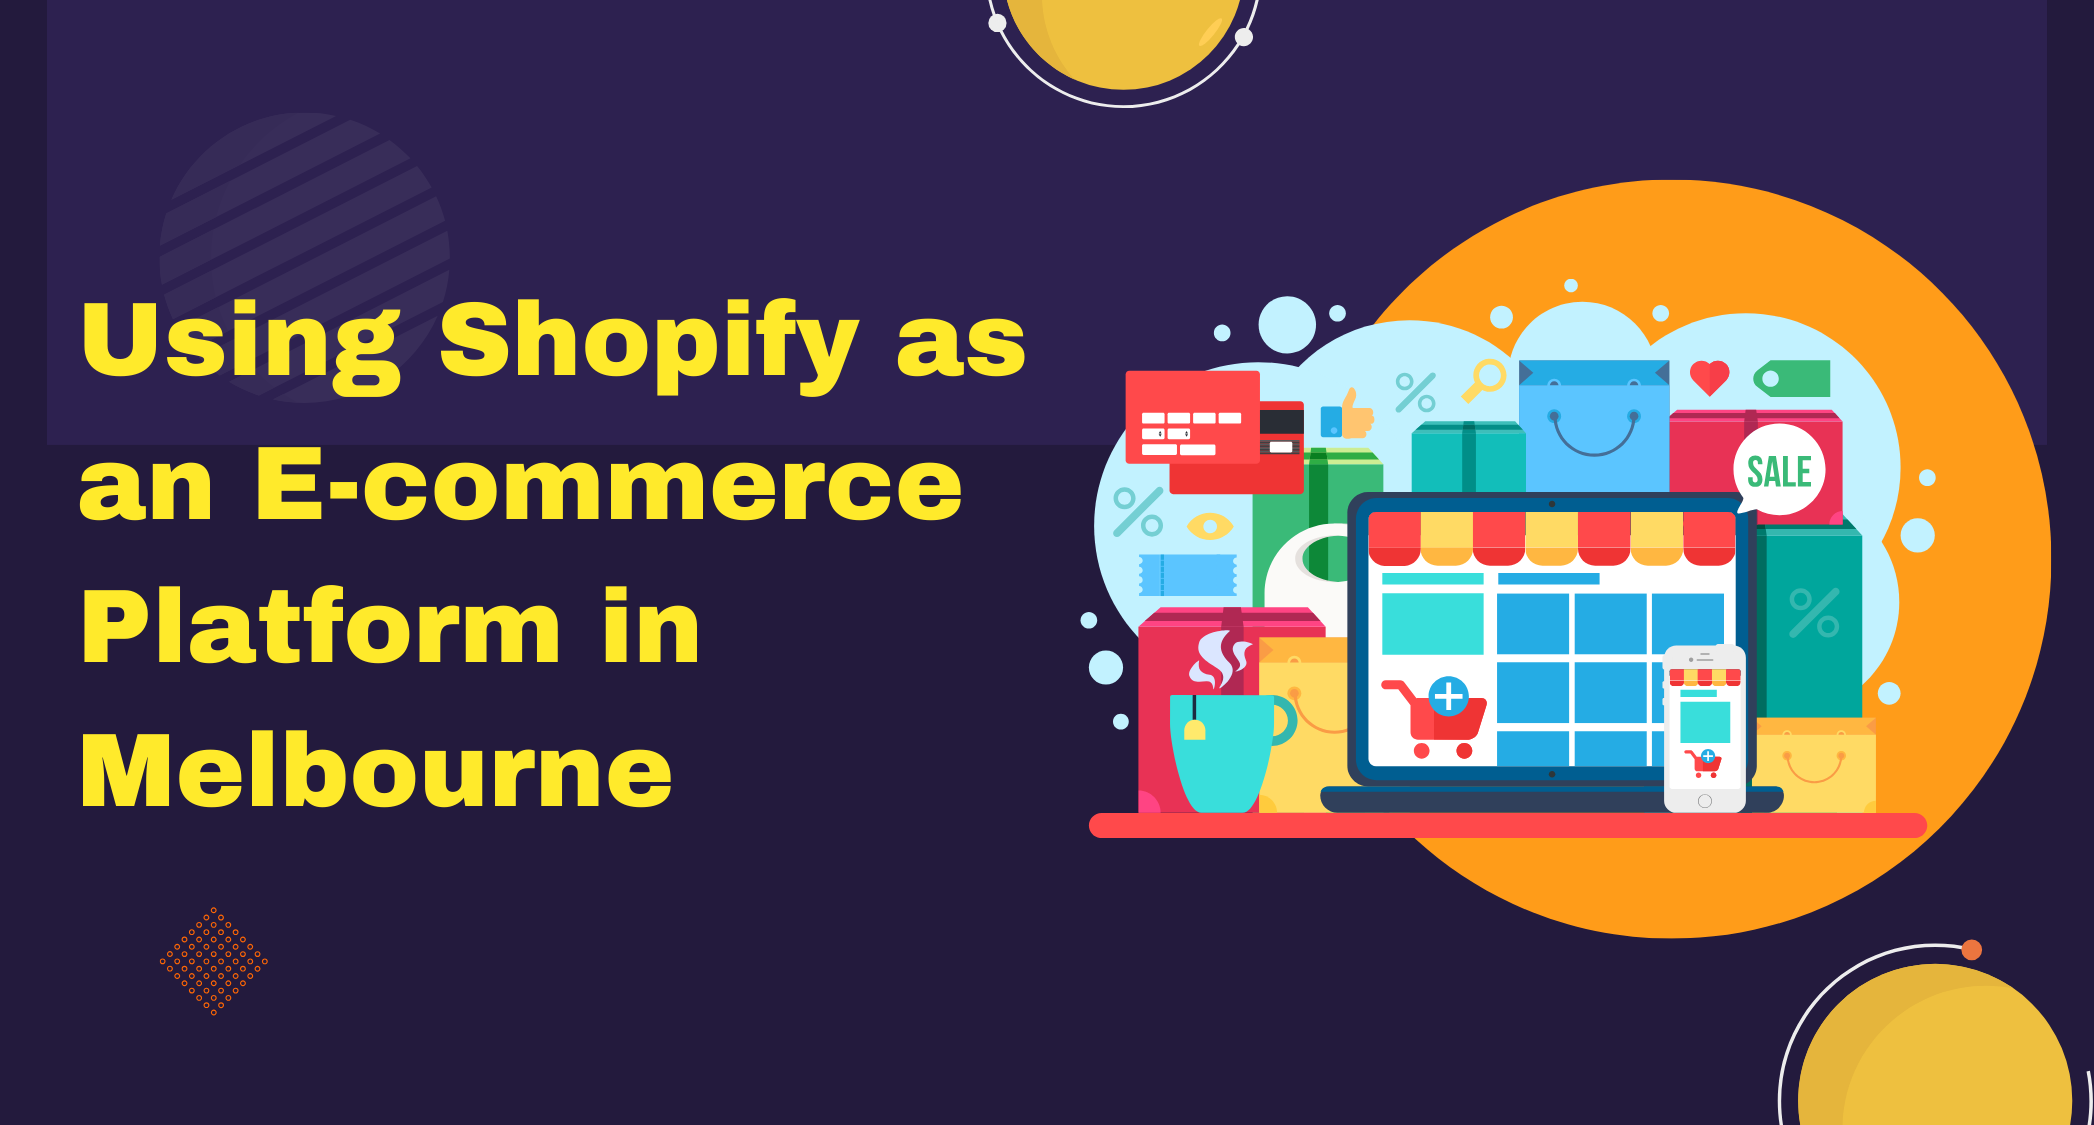 Using Shopify as an E-commerce Platform in Melbourne